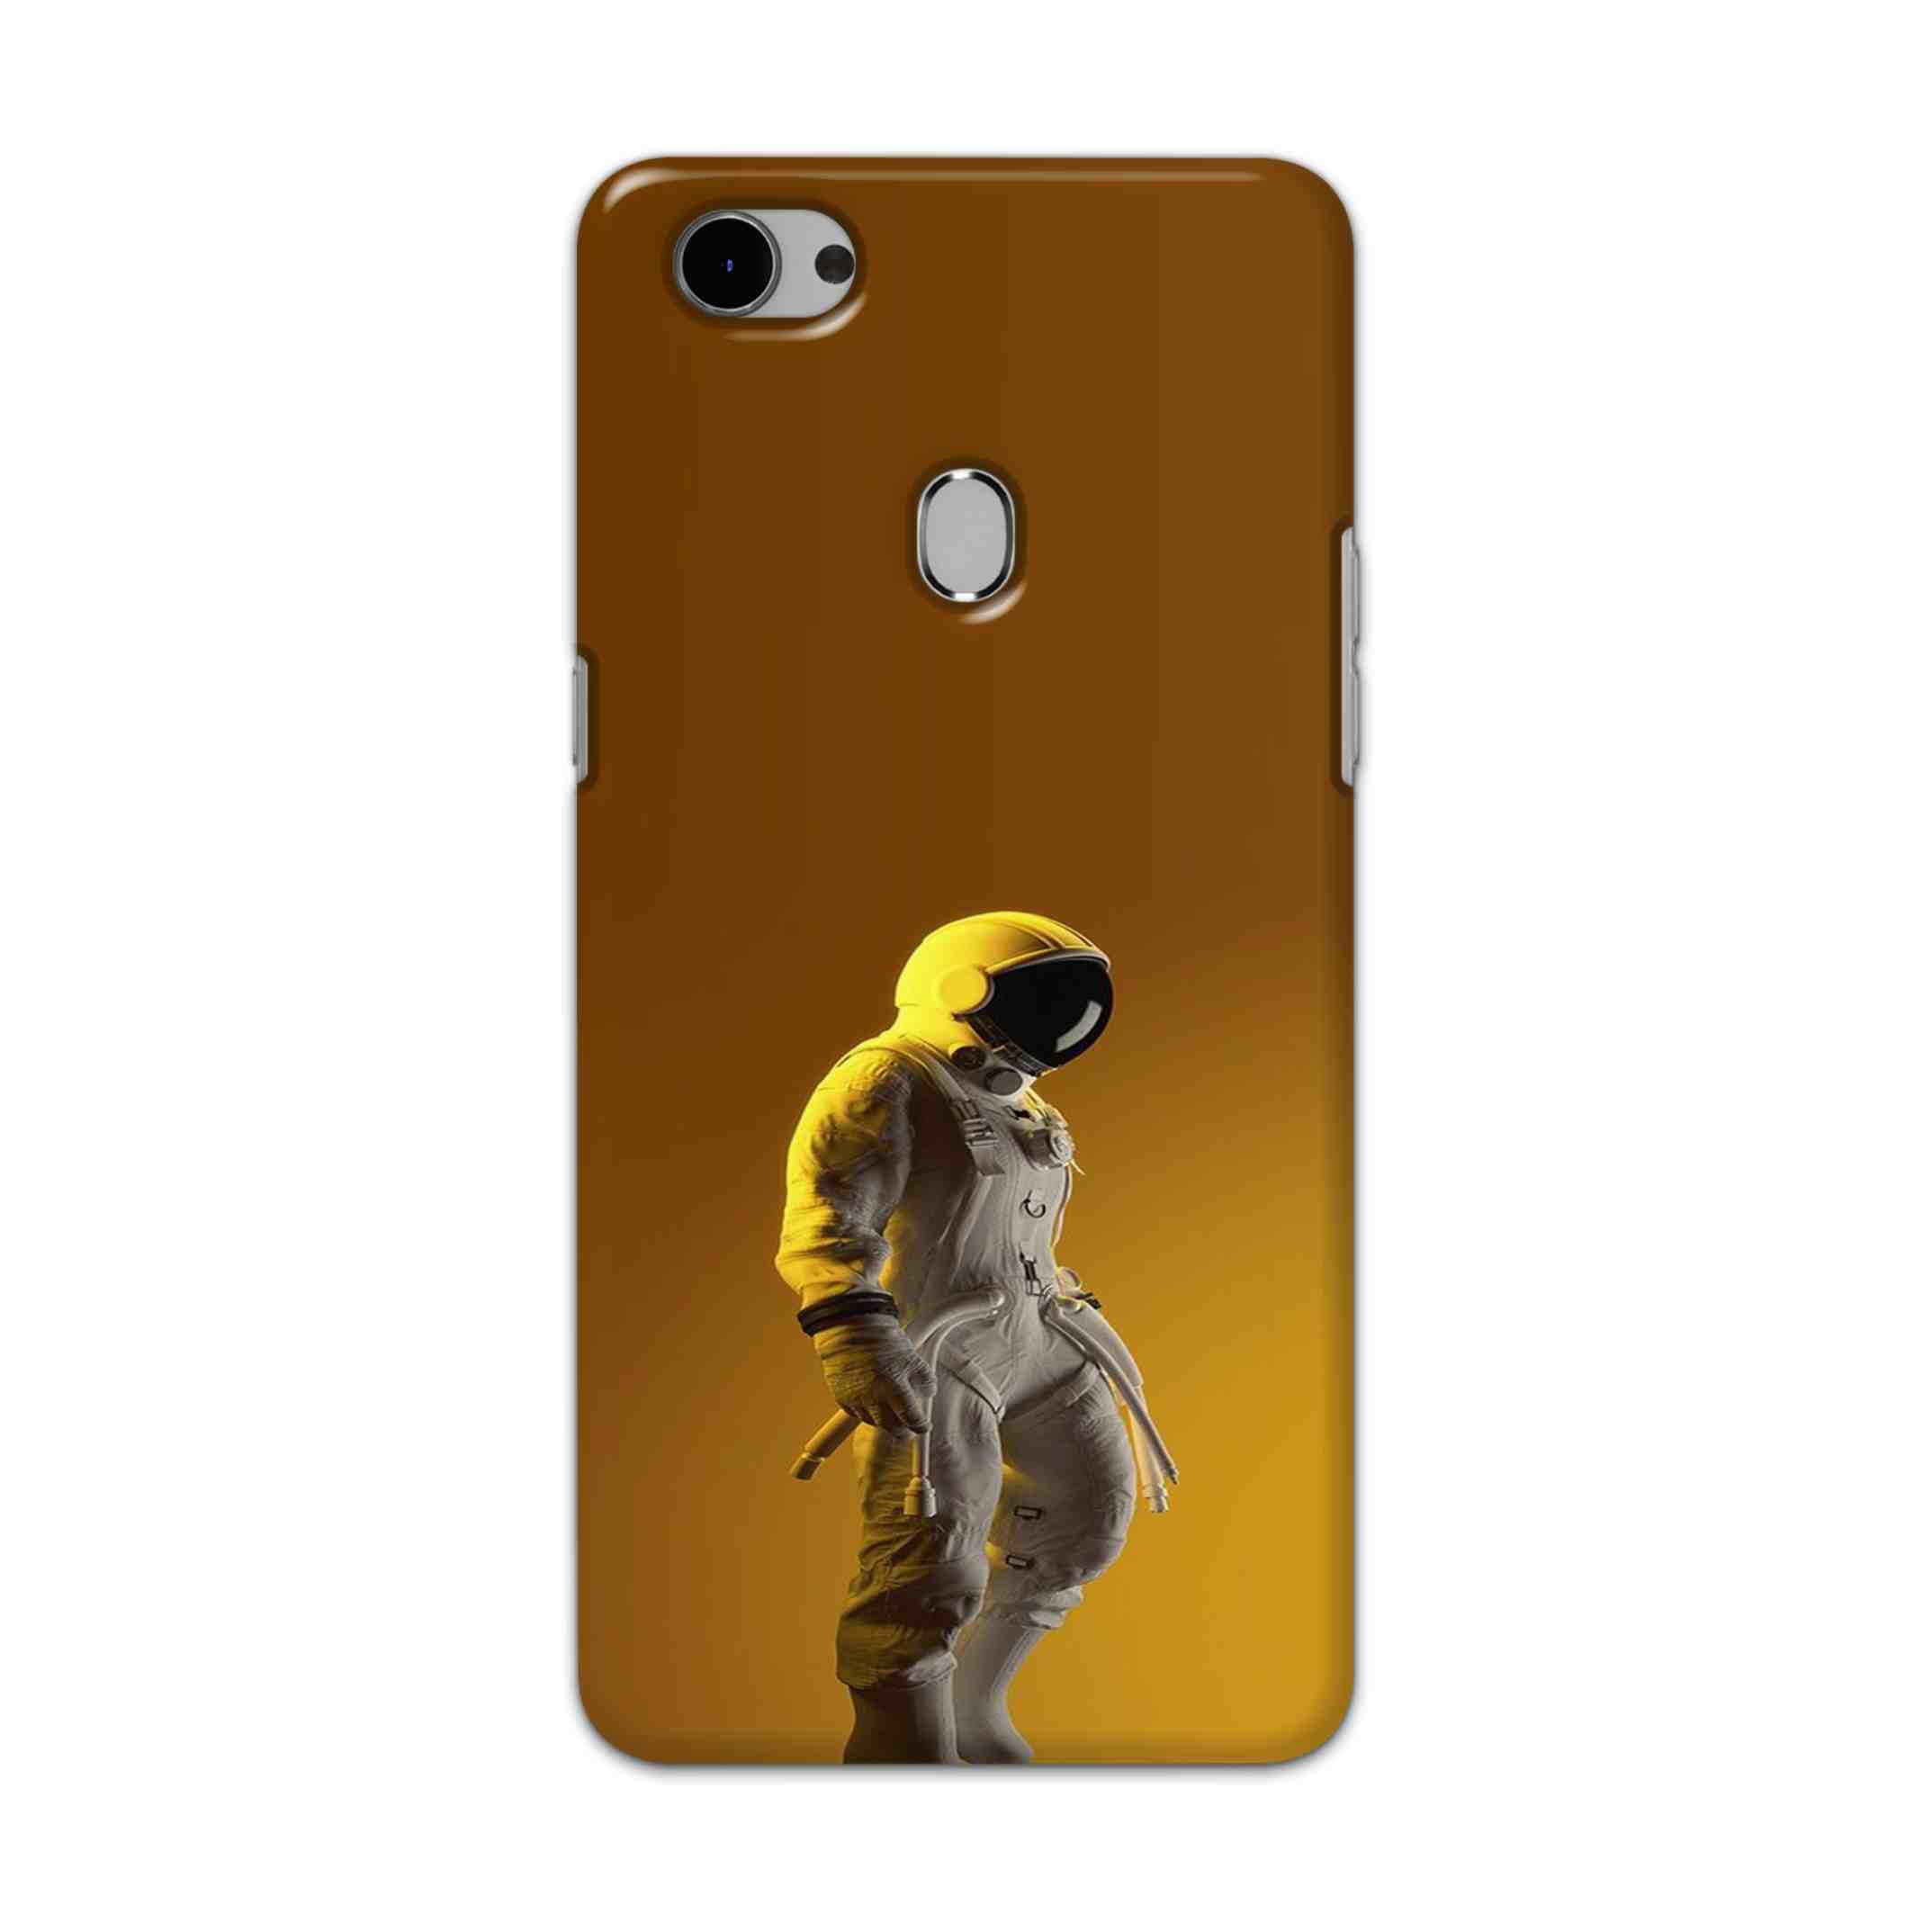 Buy Yellow Astronaut Hard Back Mobile Phone Case Cover For Oppo F7 Online